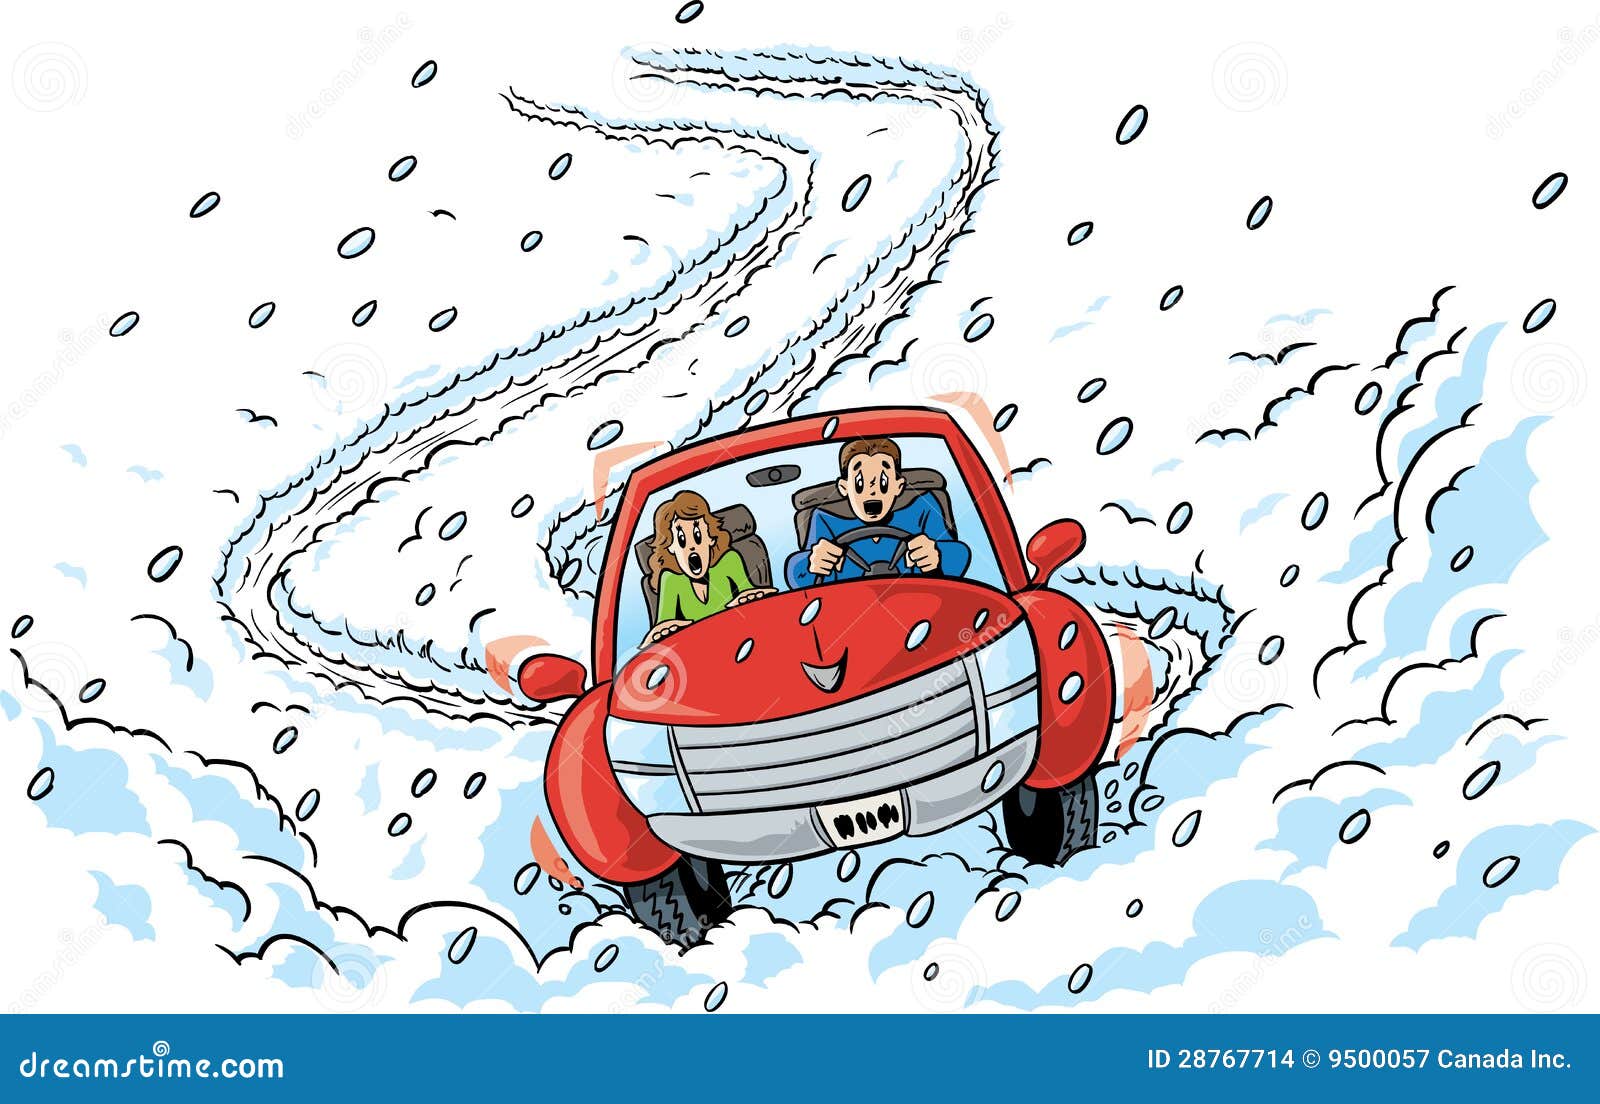 clipart driving in snow - photo #3